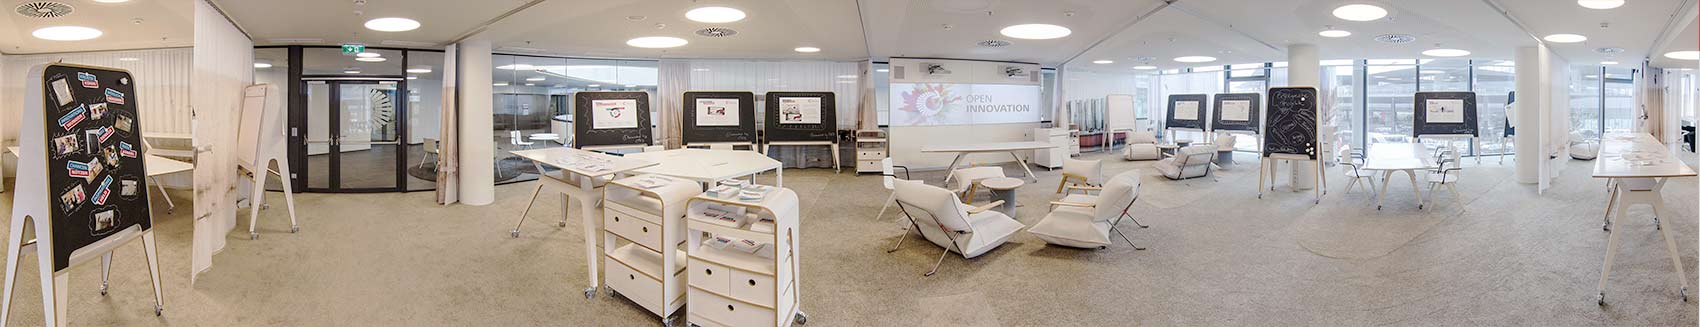 Panorama Foto des Open Innovation Lab.